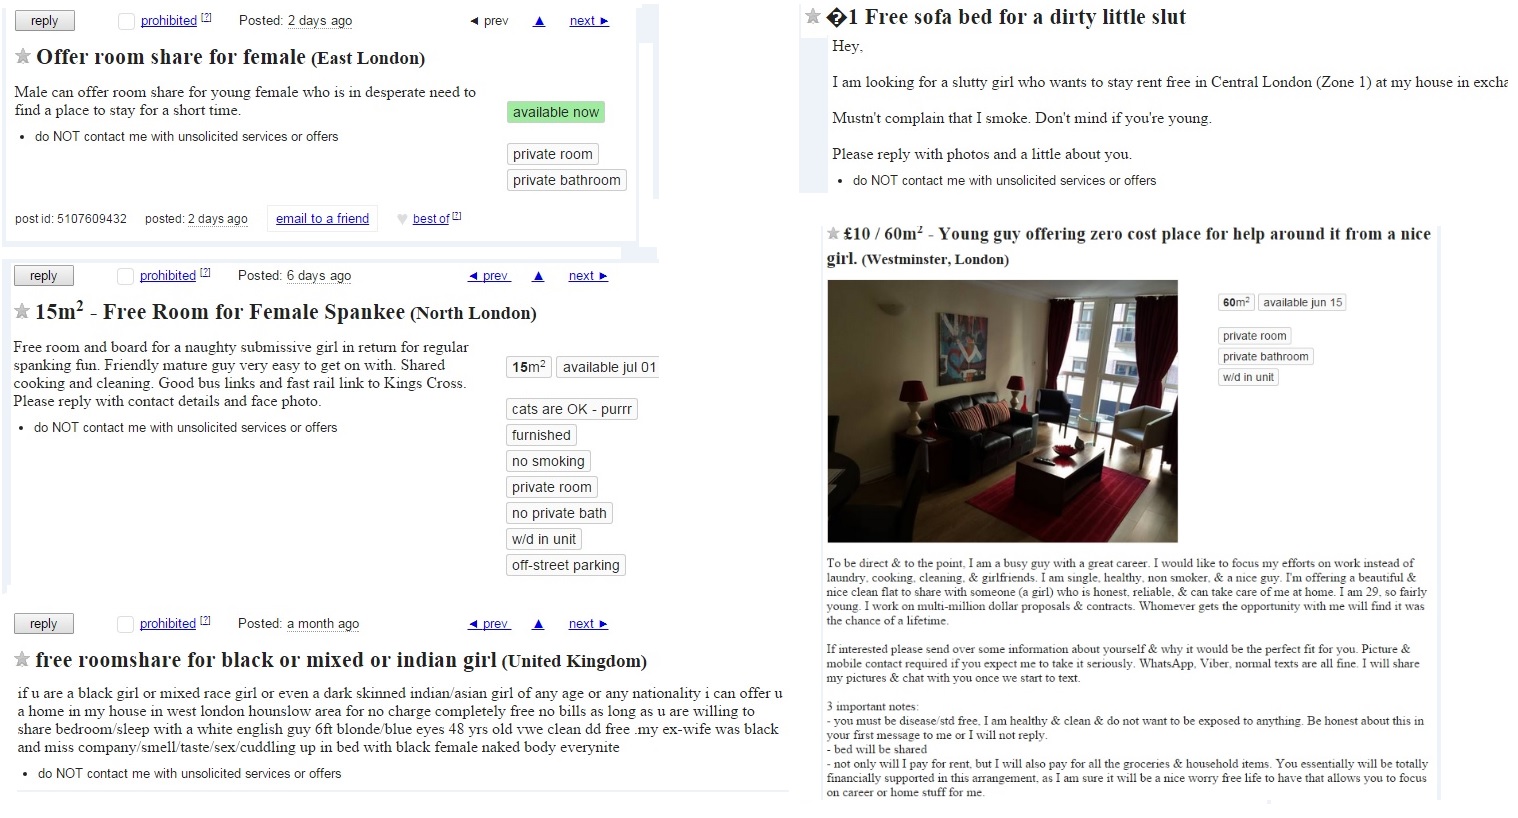 London rents crisis: 'I am looking for a slutty girl who ...